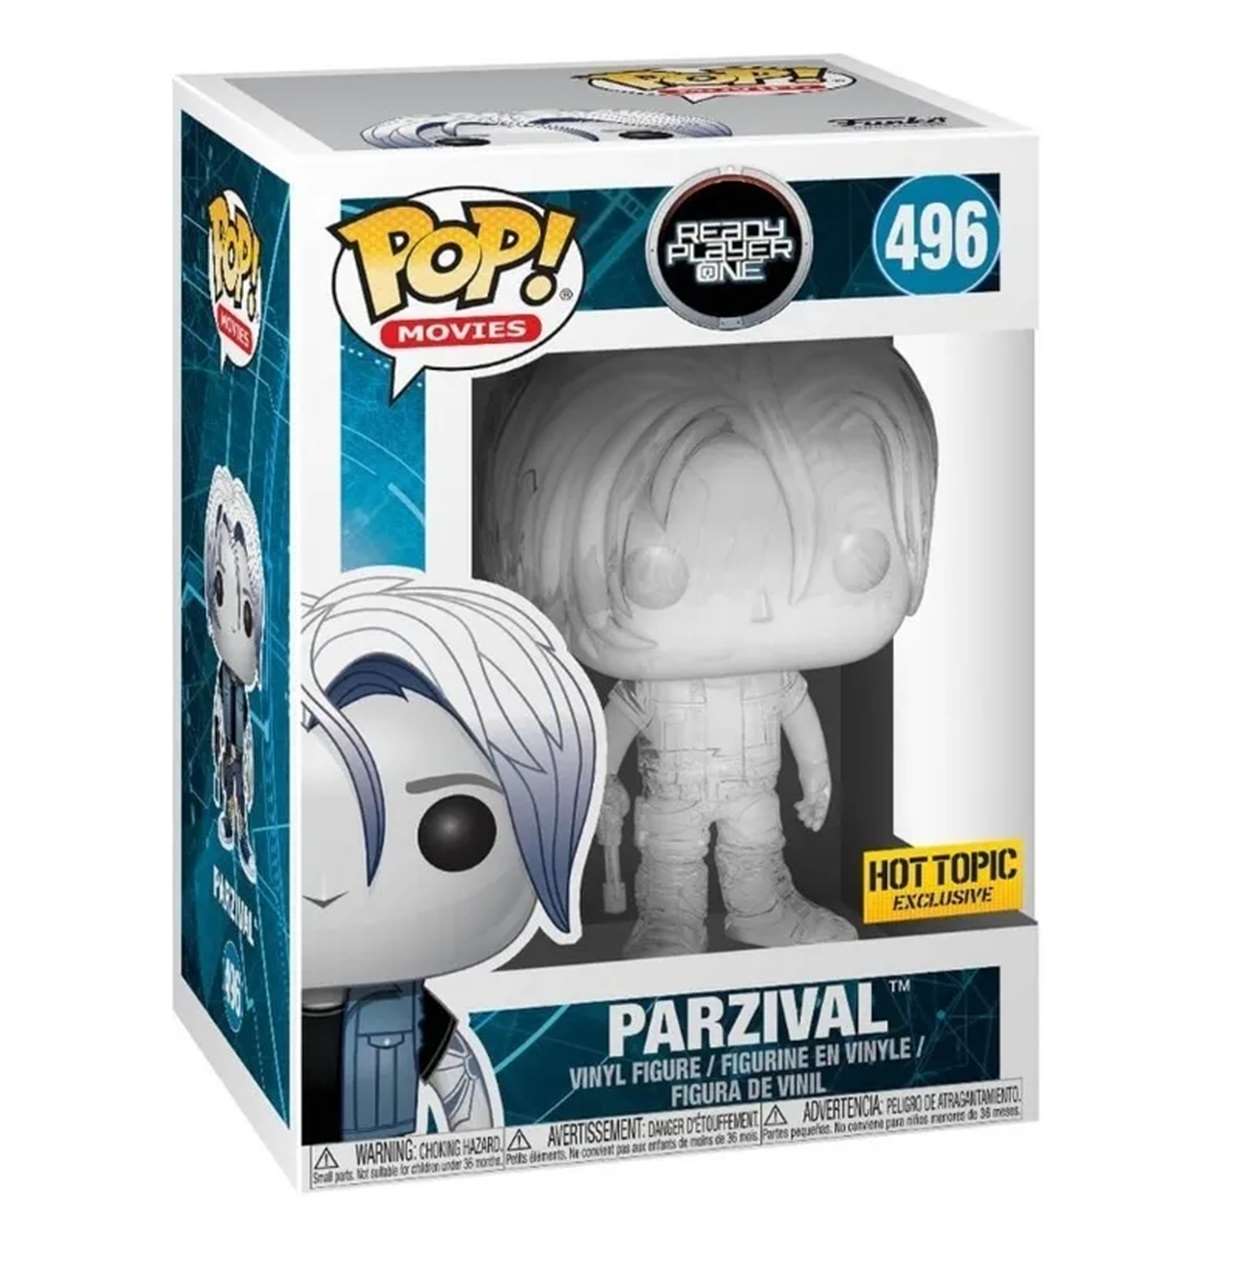 Parzival #496 Figura Ready Player One Exclusivo Hot Topic